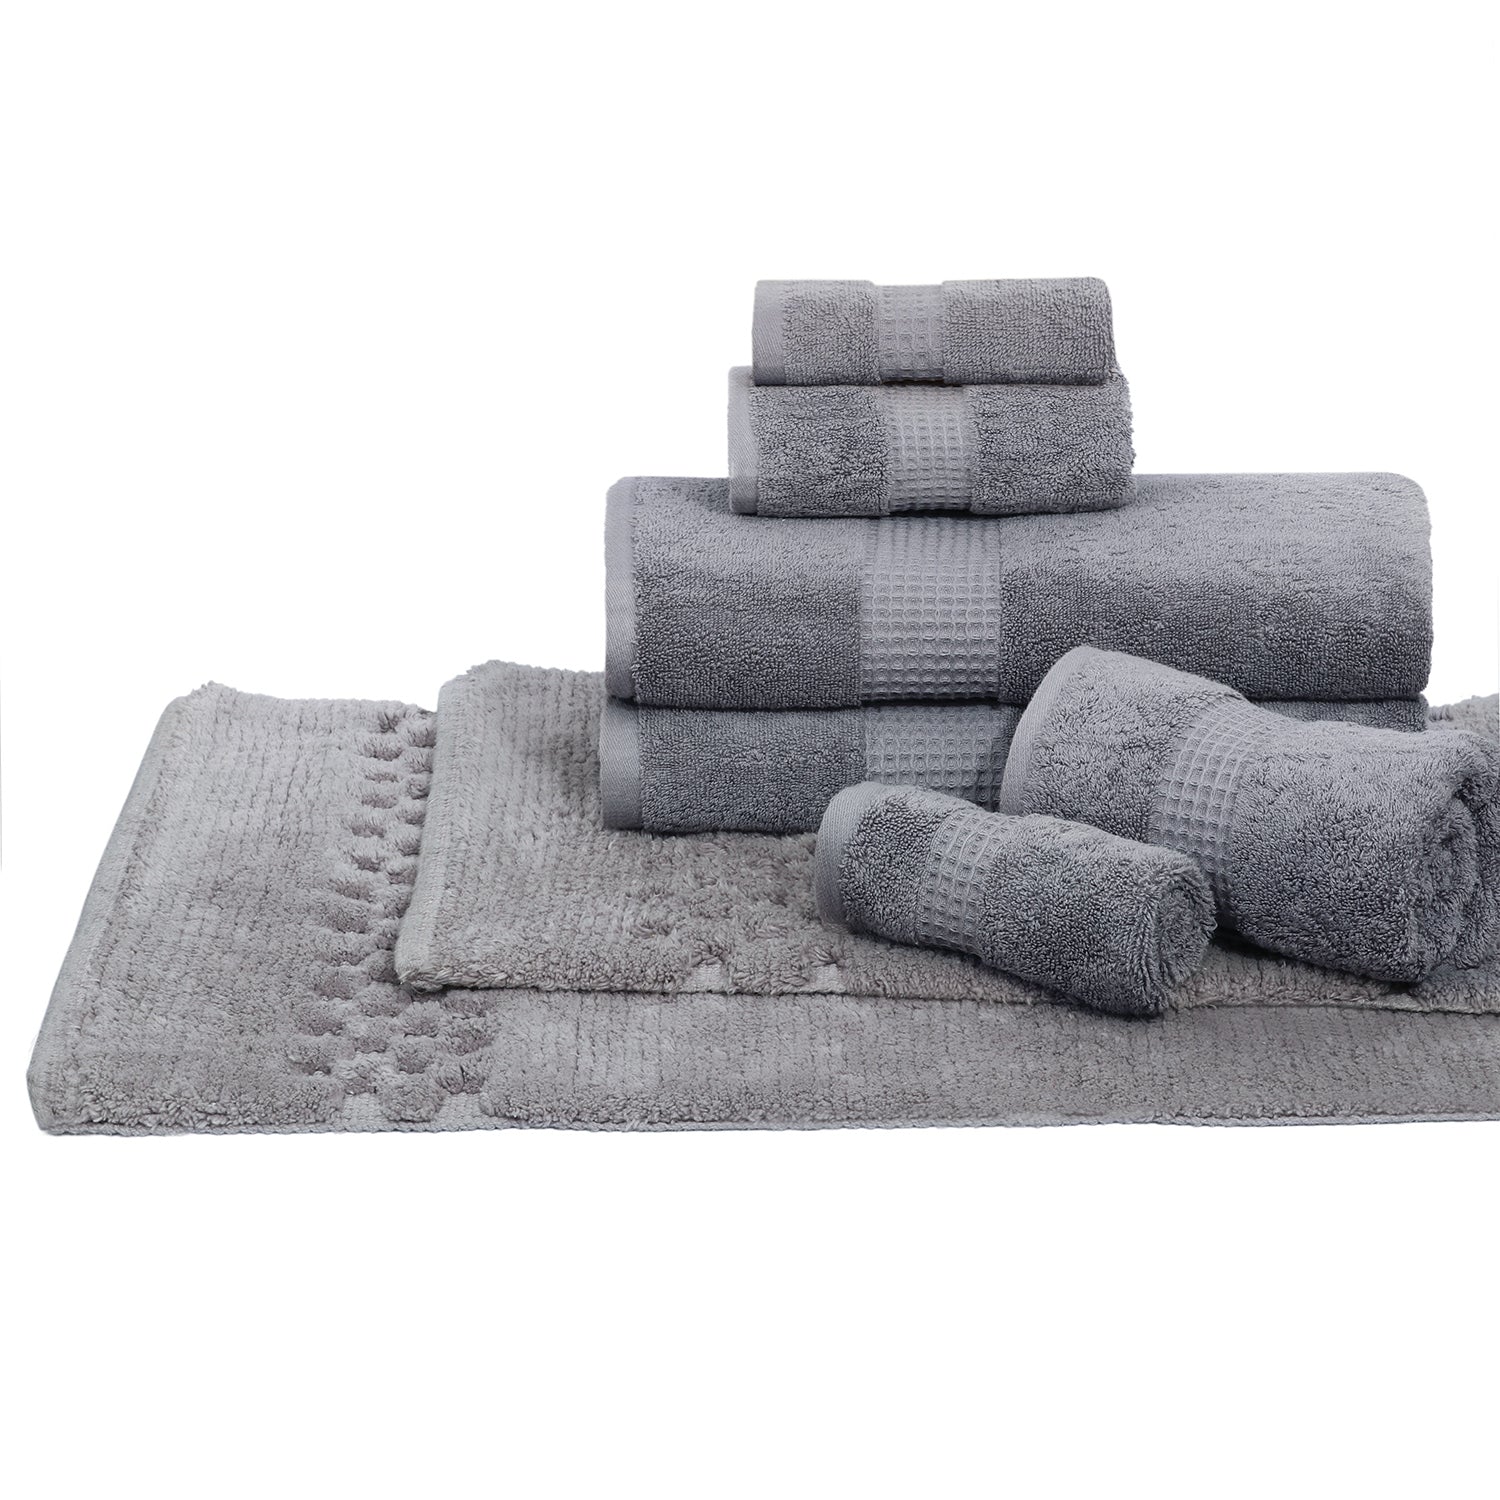 Combo Deal-Terry Towel 6 pc set and Honeycomb Bath rug 17x24/21x34 - TreeWool Bundle Deal#color_grey